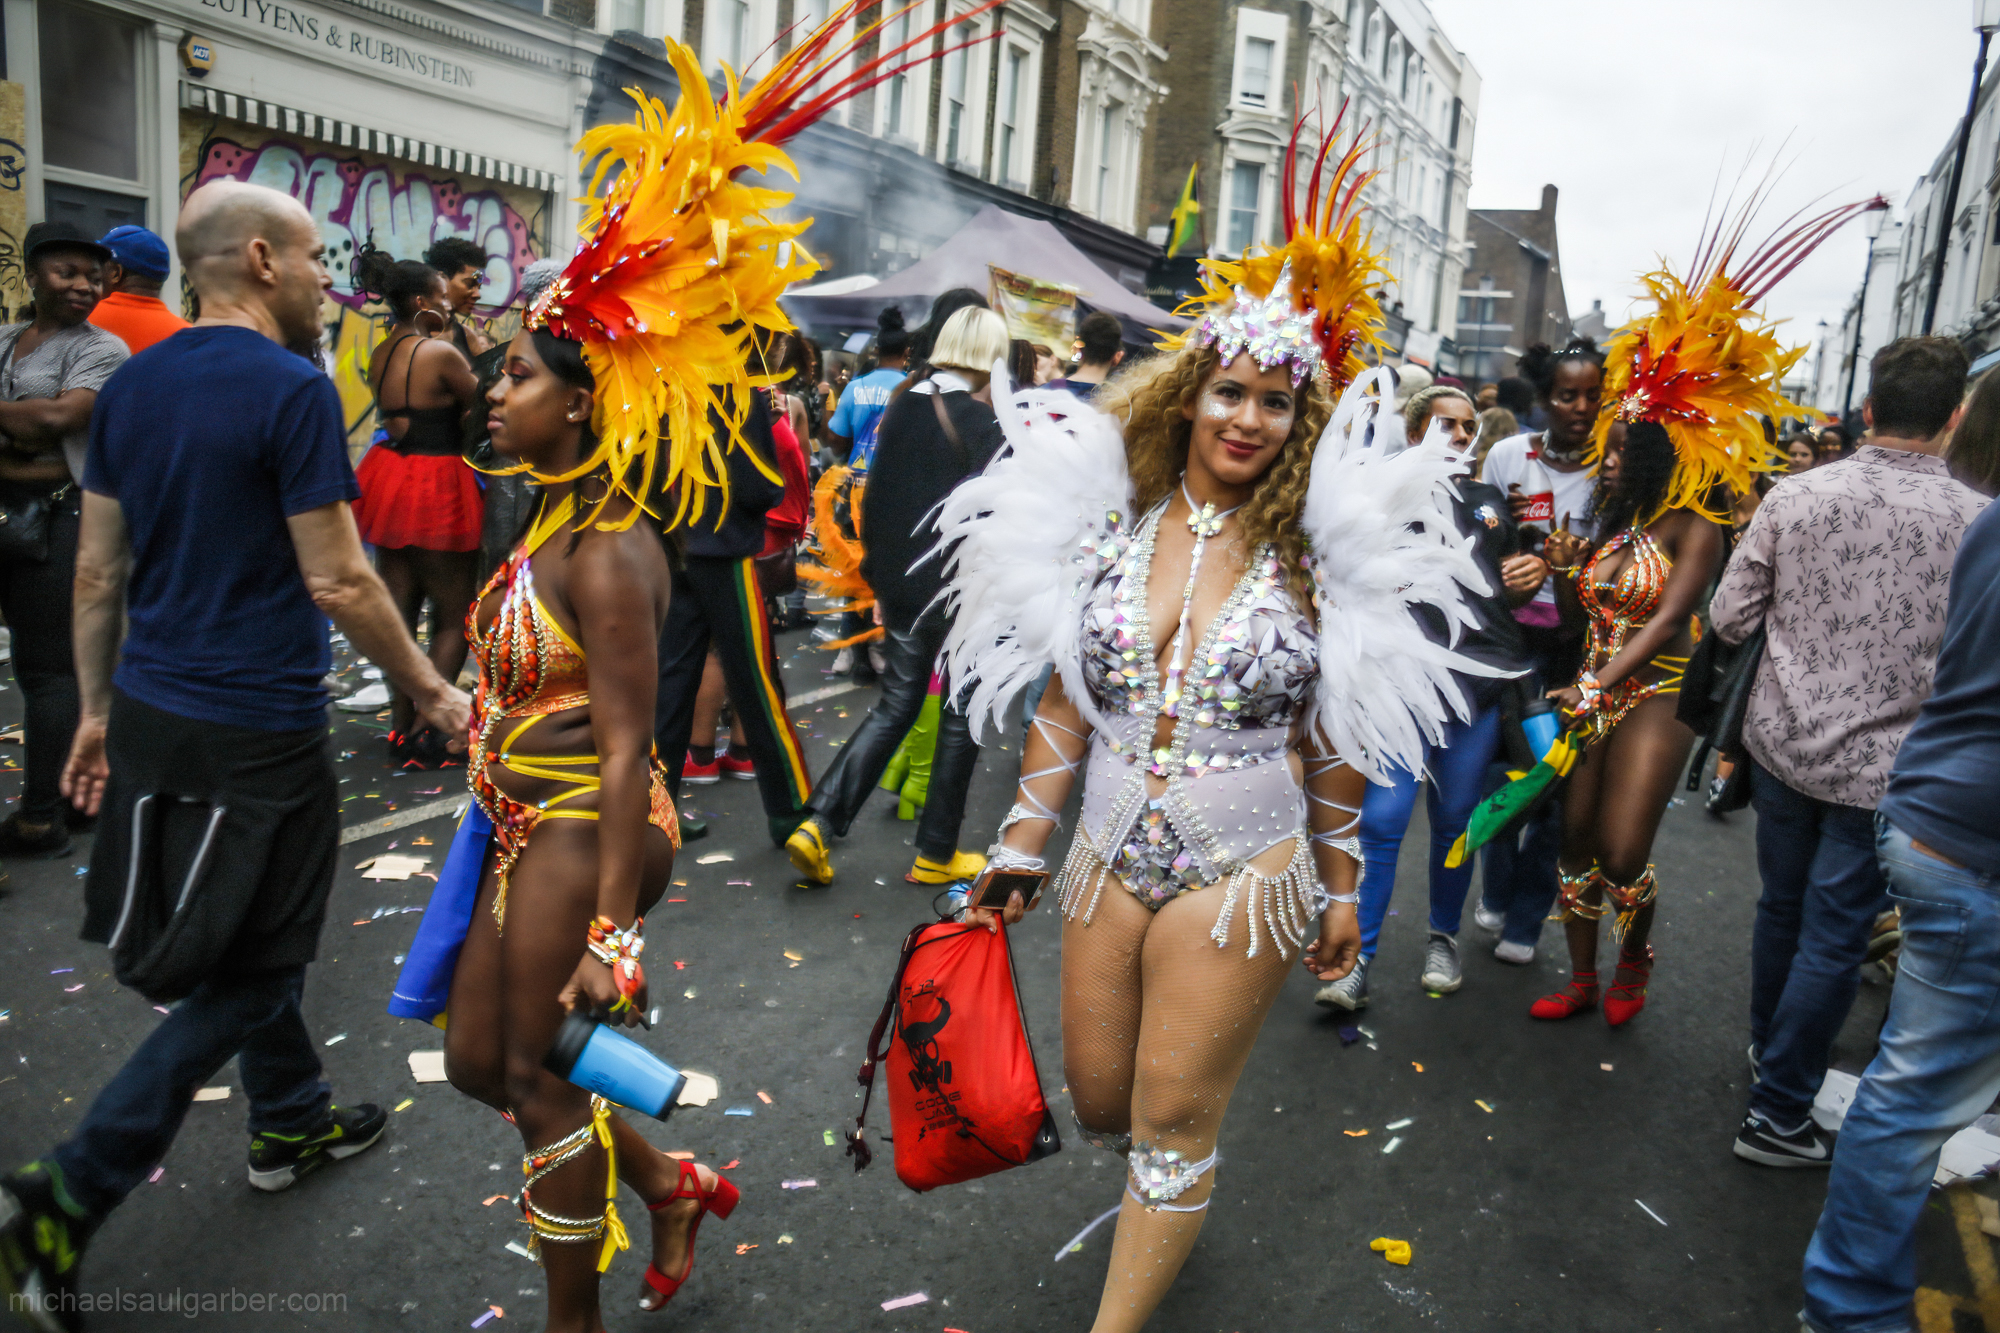 People from the West Indies transplanted the tradition of Carnival costumes to London, Notting Hill Carnival, 2018